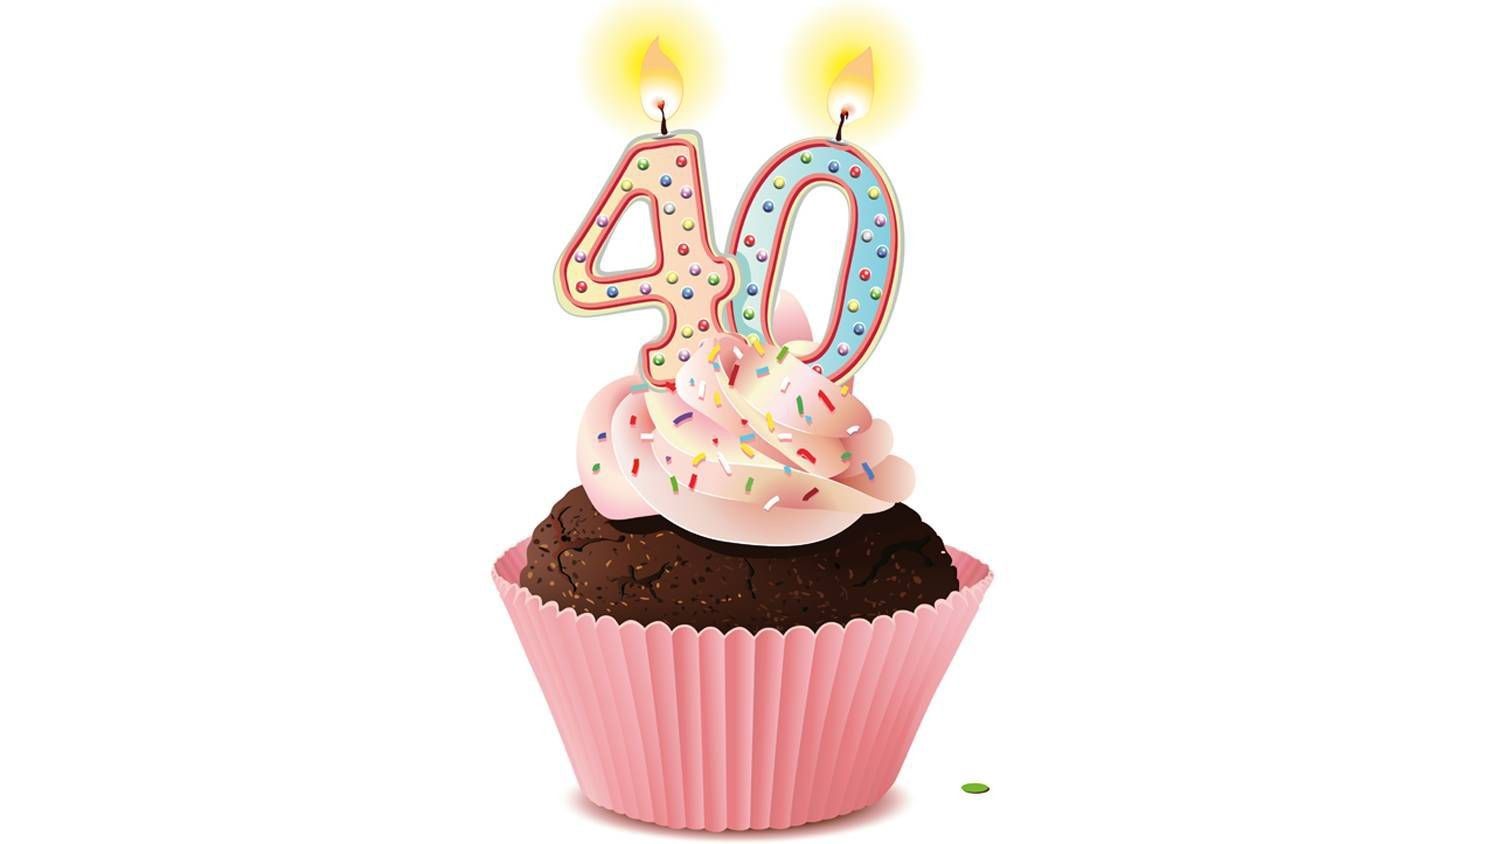 The Empowering Epoch: How Turning 40 Can Be an Invigorating New Start